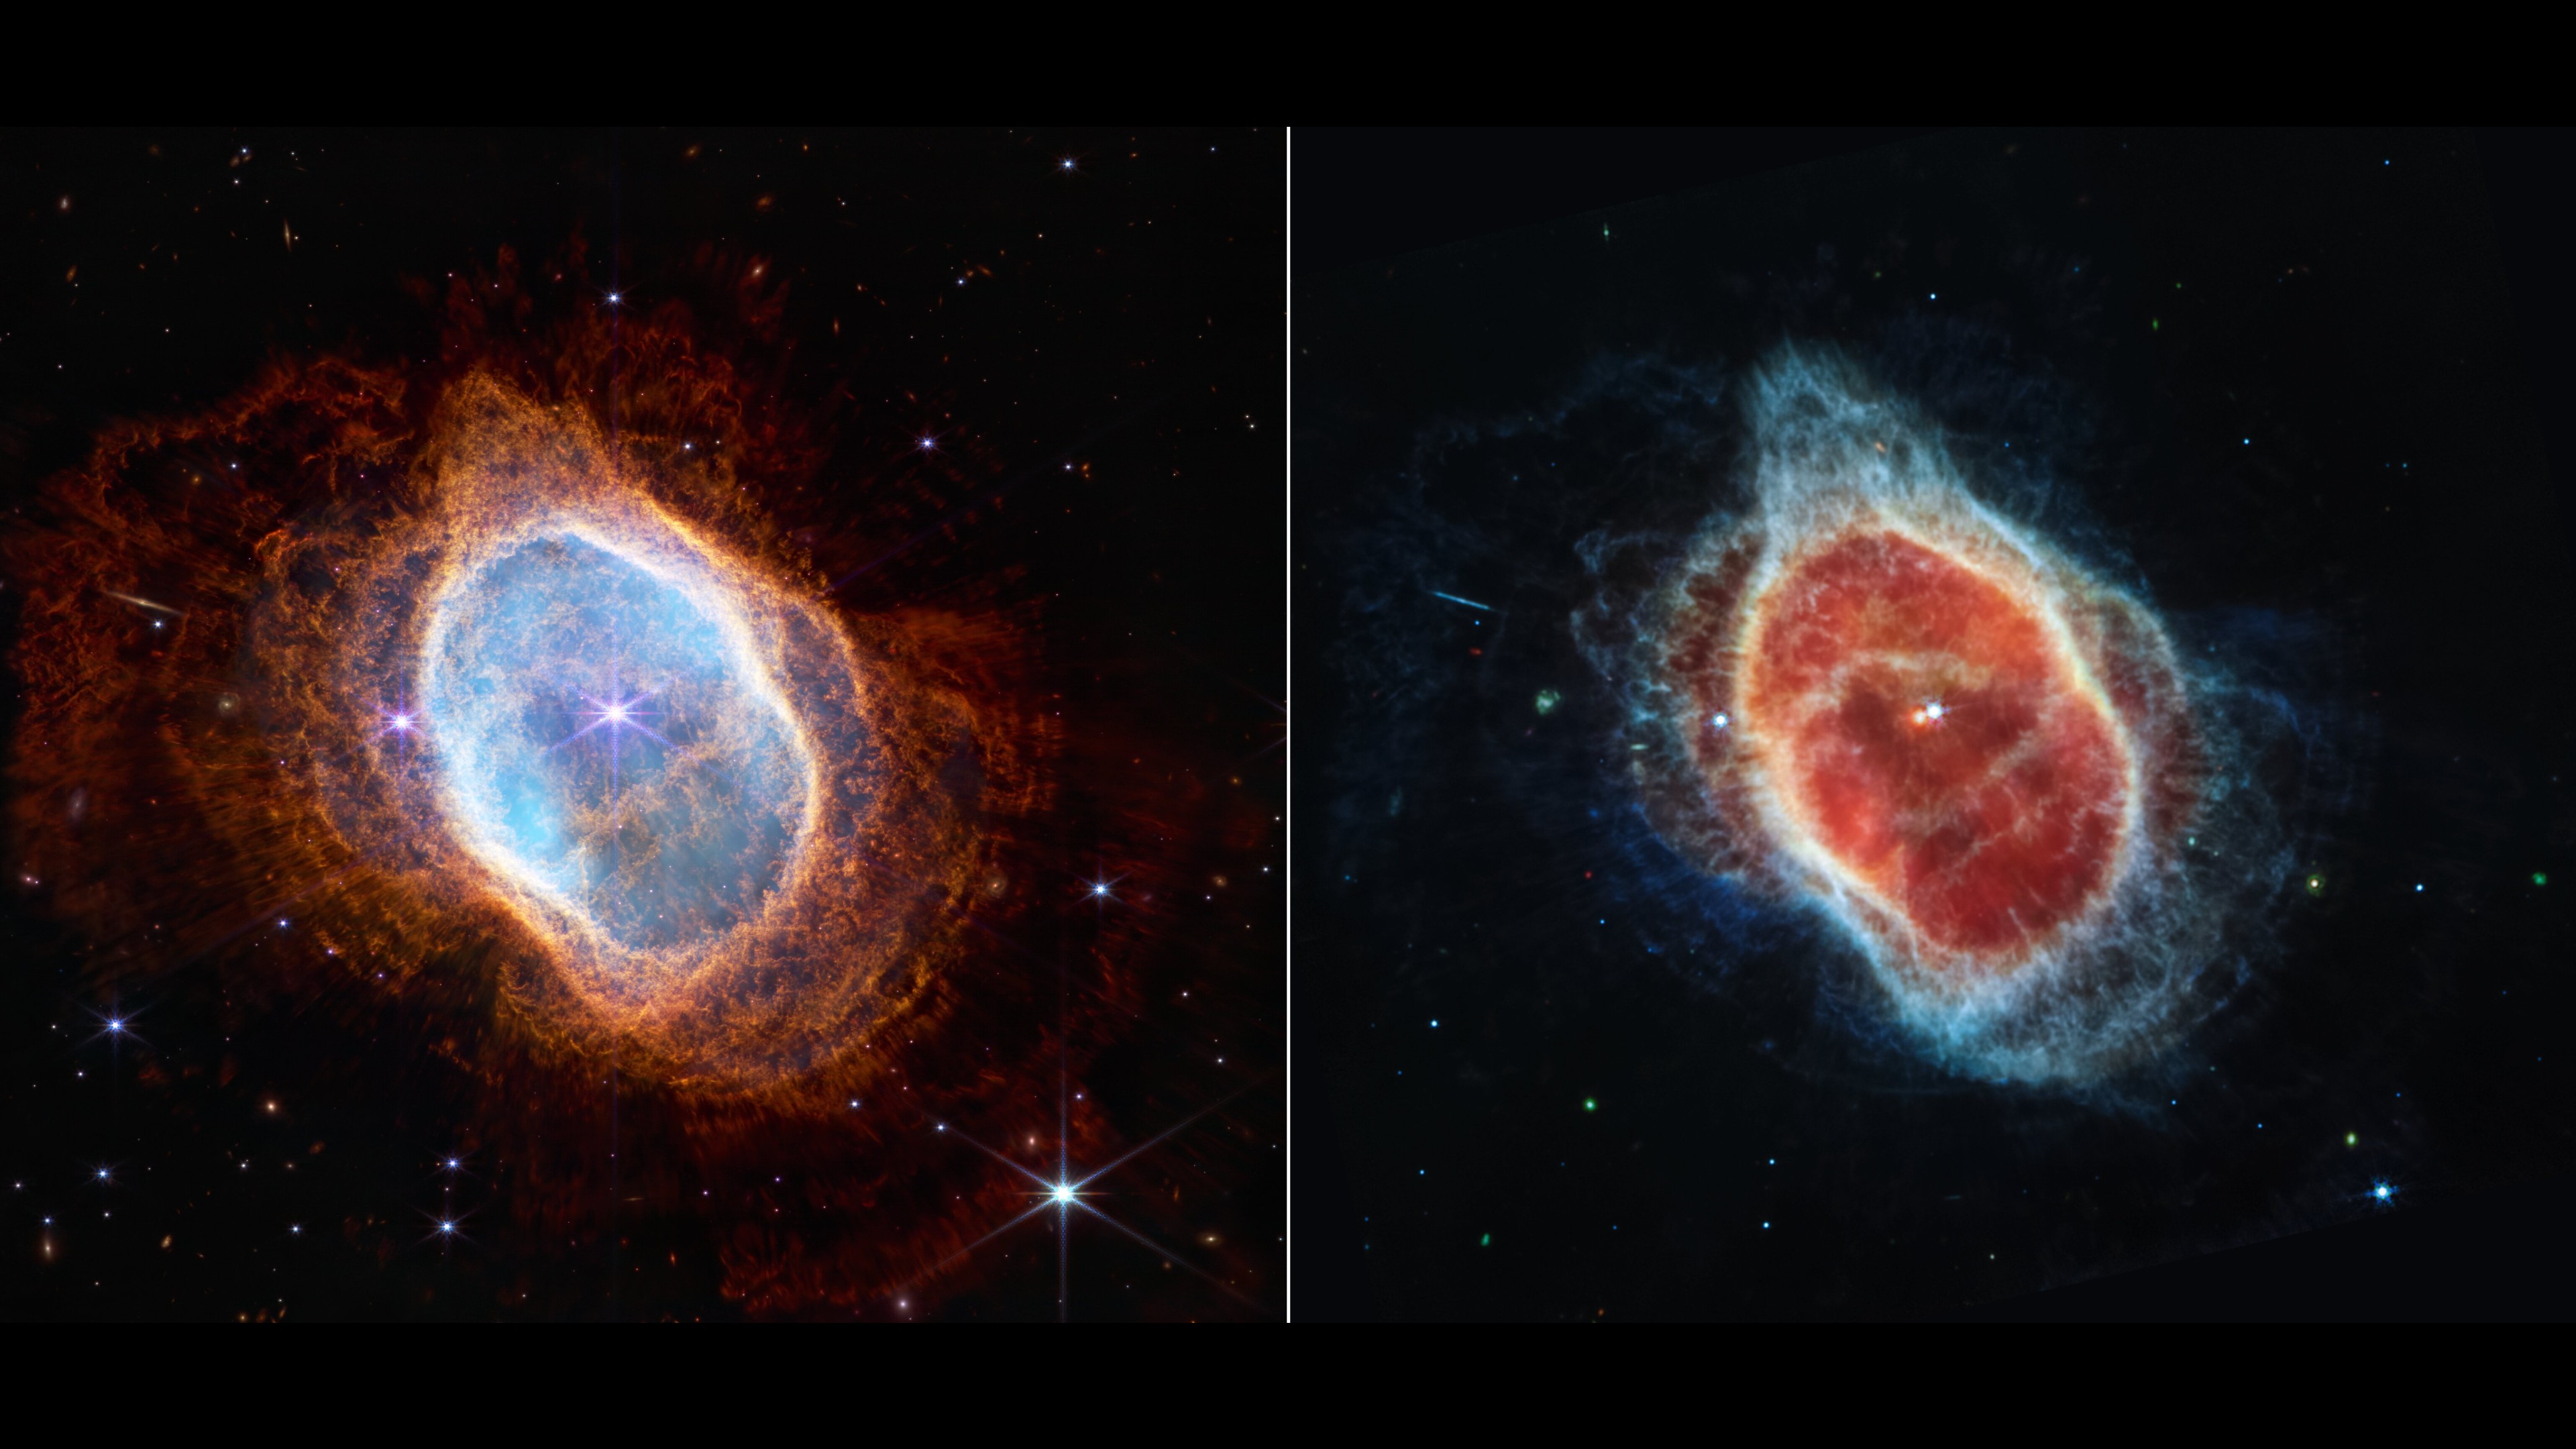 The image is split down the middle, showing two views of the Southern Ring Nebula.